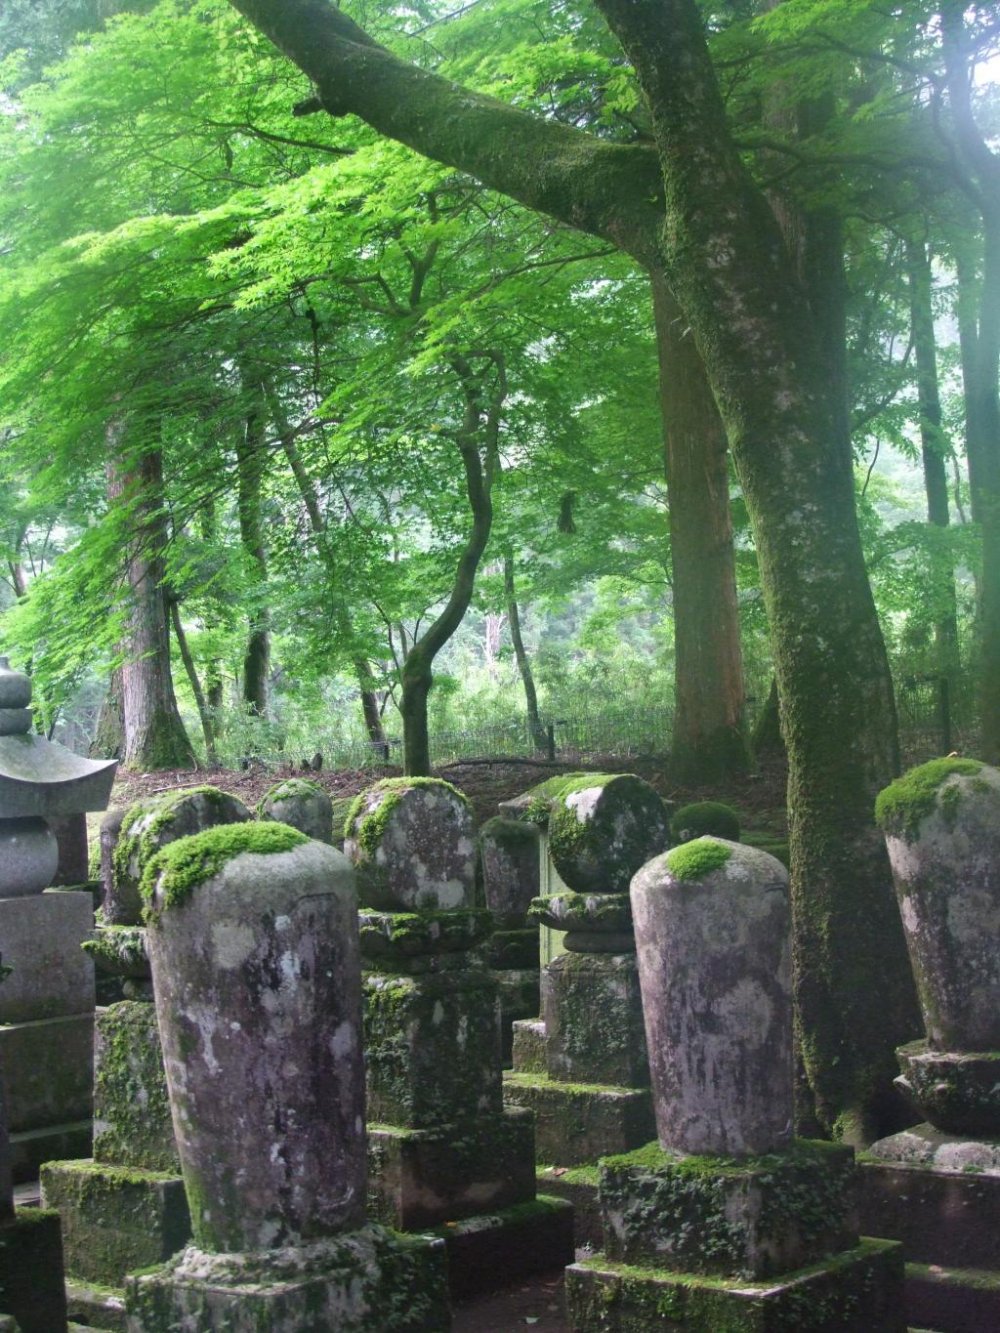 A tranquil final resting place for the monks that served Rinno-ji Temple